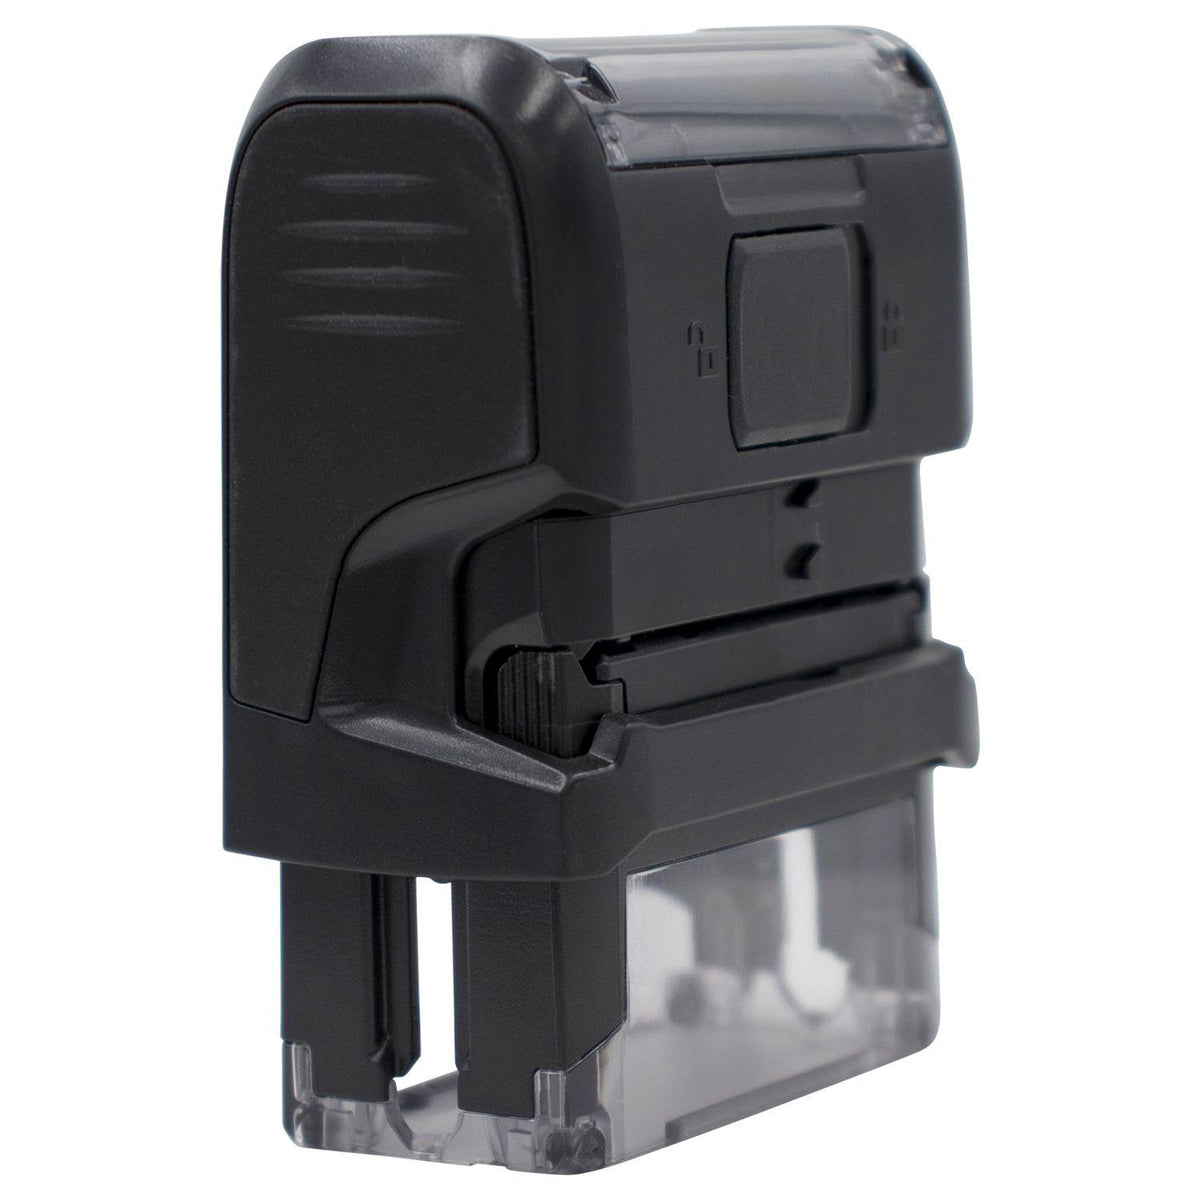 Large Self-Inking Review and Sign Stamp - Engineer Seal Stamps - Brand_Trodat, Impression Size_Large, Stamp Type_Self-Inking Stamp, Type of Use_Postal &amp; Mailing, Type of Use_Shipping &amp; Receiving